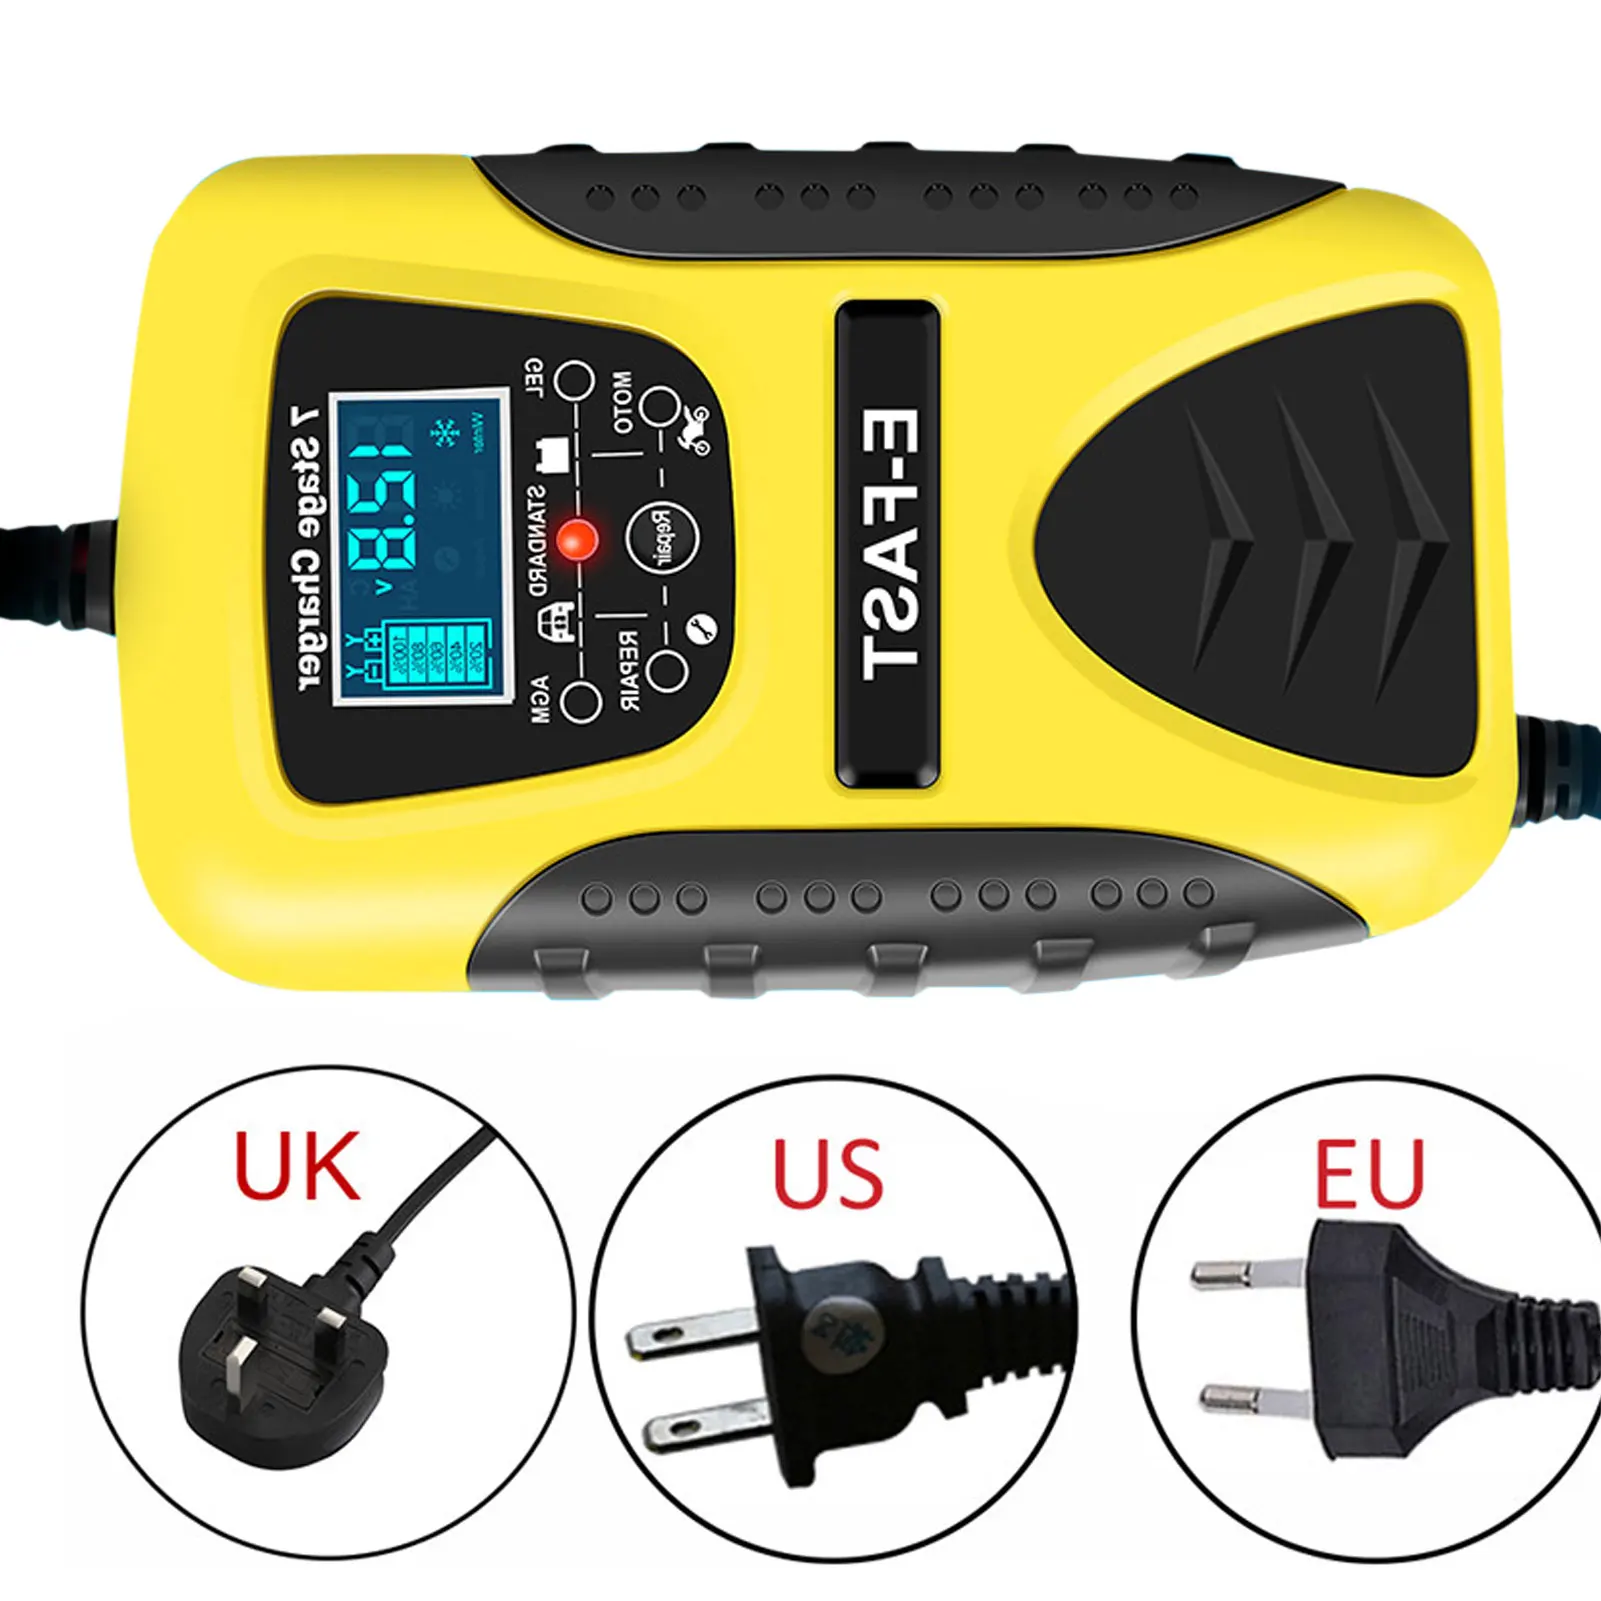 

12V 7A Full Automatic Battery-chargers Digital LCD Display Car Battery Chargers Power Puls Repair Chargers Wet Dry Lead Acid